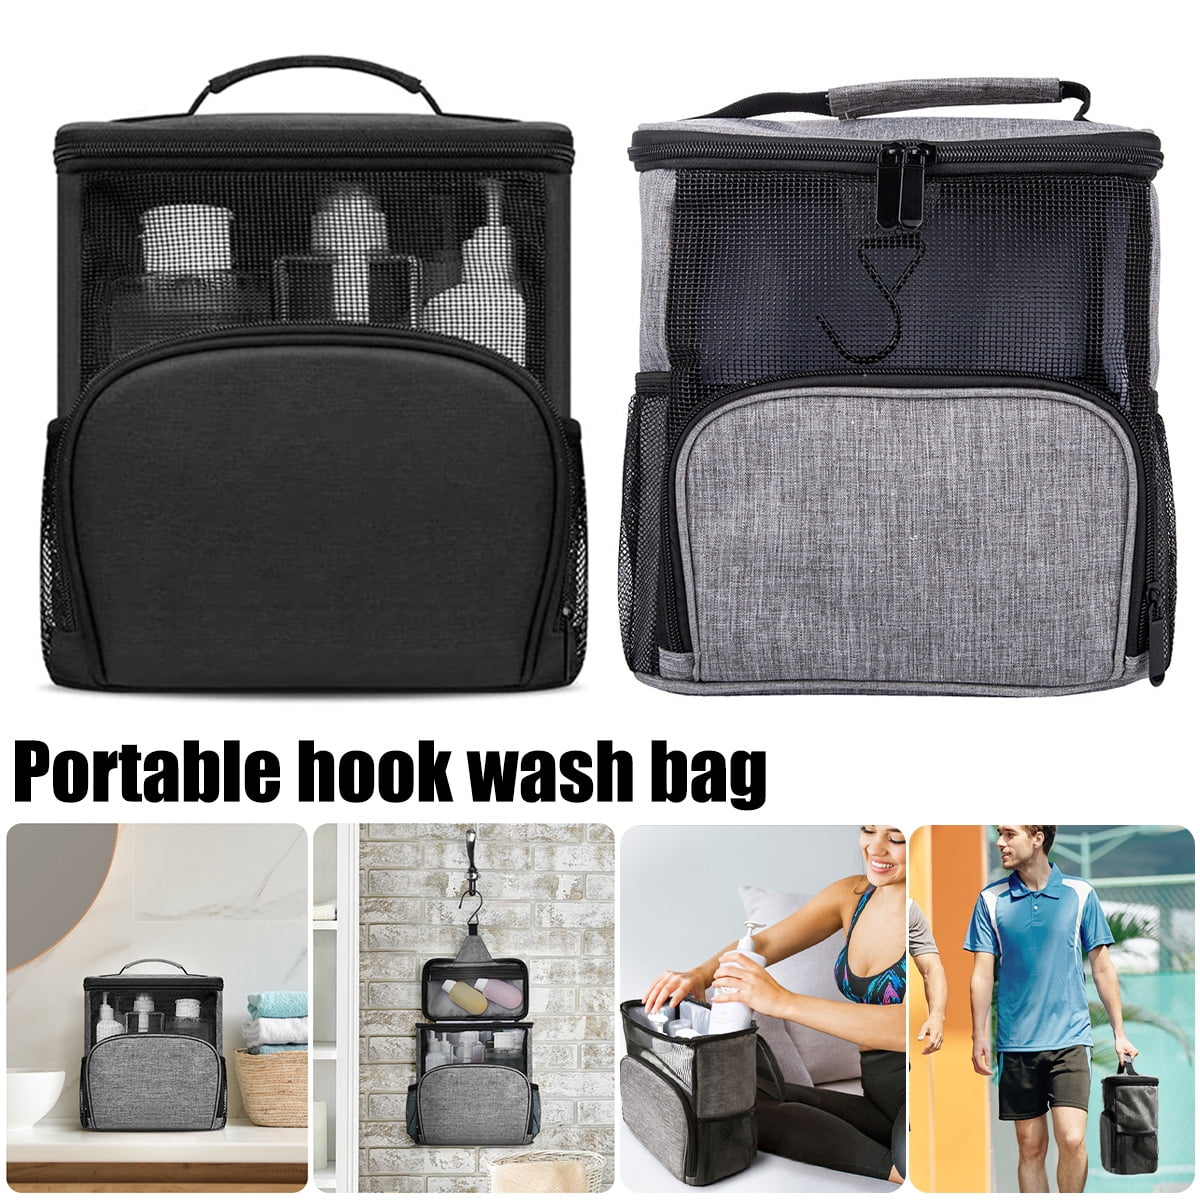 Retrok Mesh Shower Caddy Bag Portable Hanging Shower Tote Bags with ...